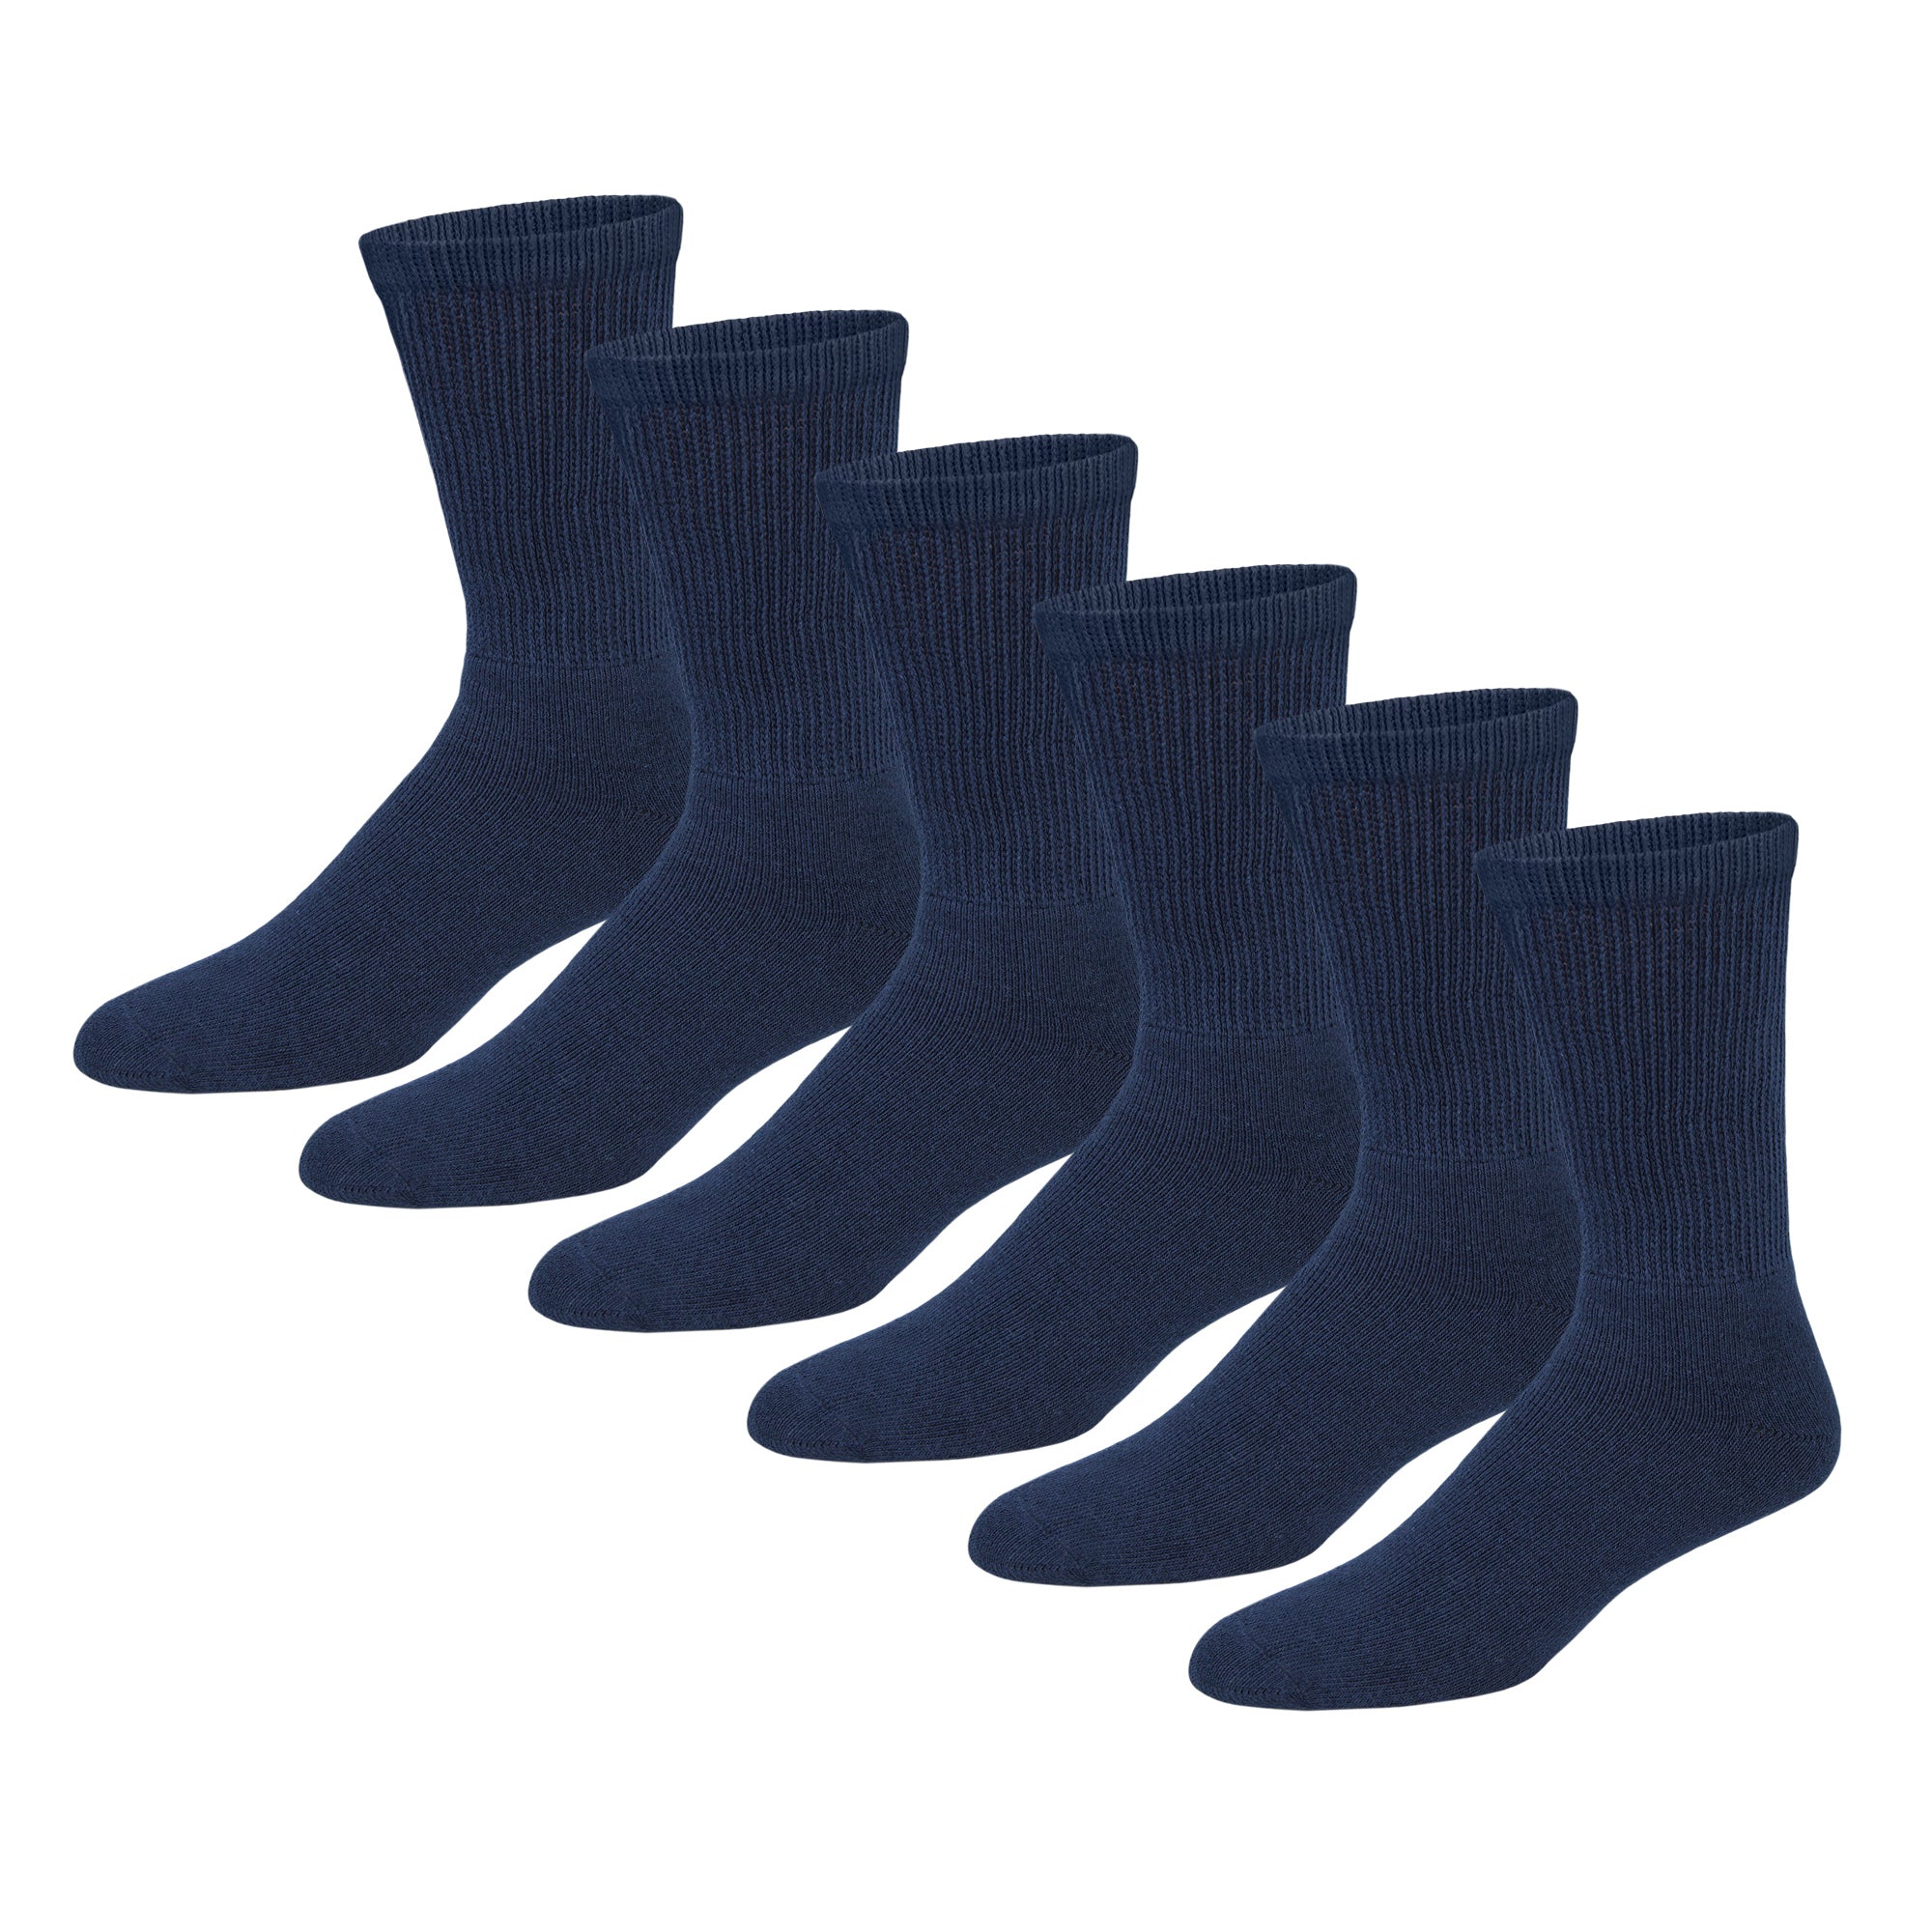 6 Pack Mens Extra Wide Non Binding Diabetic Socks for Poor Circulation